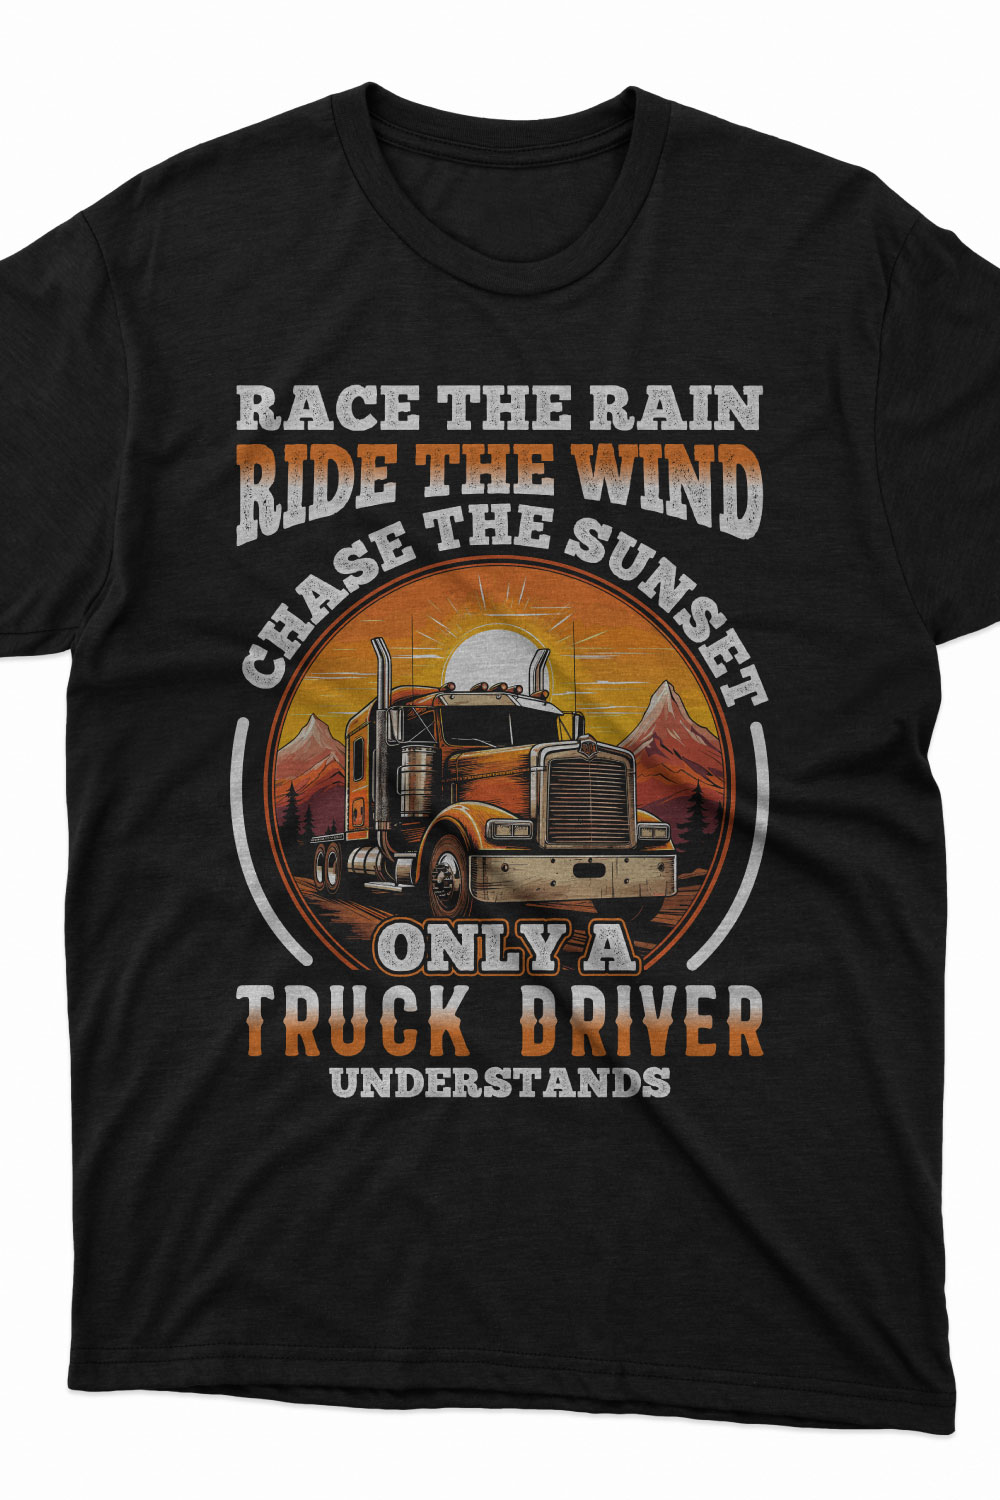 race the rain ride the wind chase the sunset only a truck driver understands, truck driver t shirt design pinterest preview image.